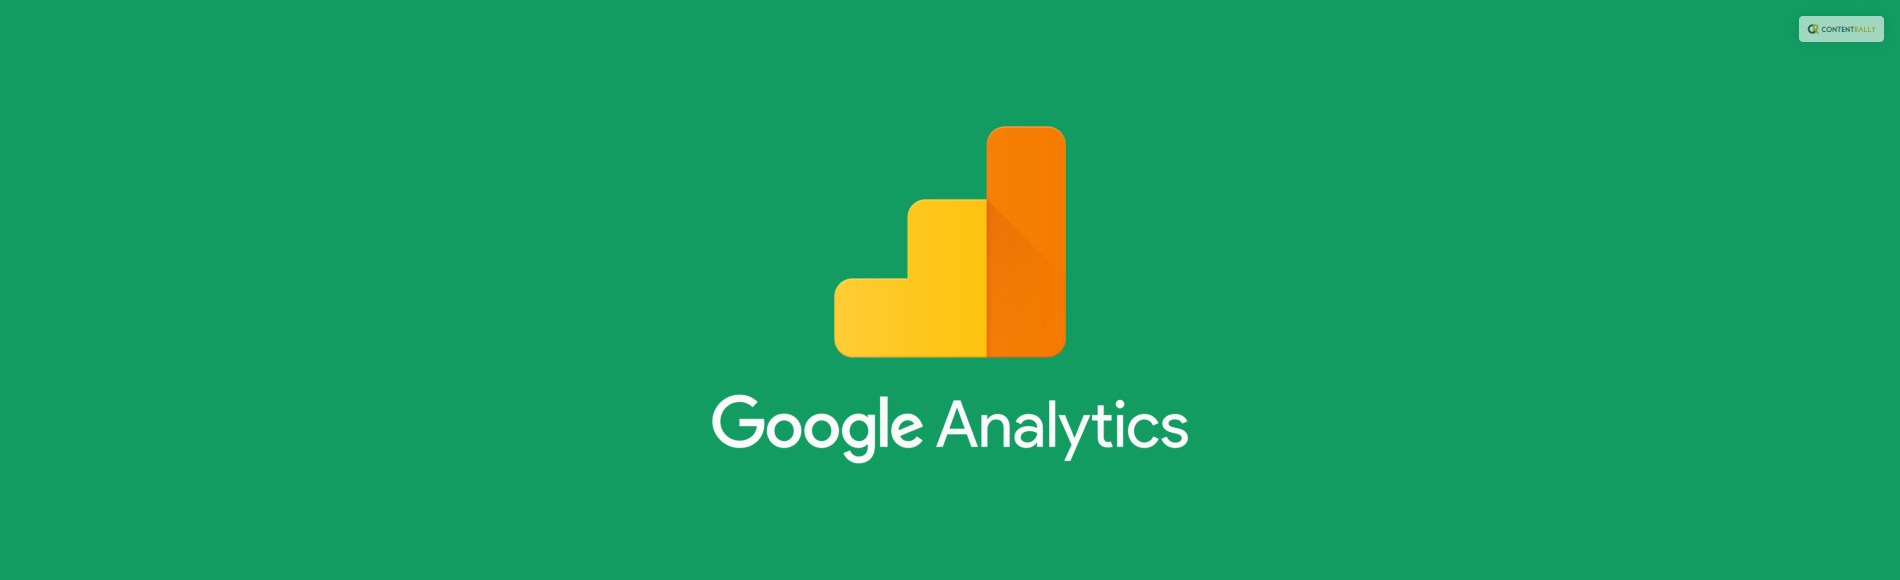 what feature can join offline business systems data with online data collected by google analytics